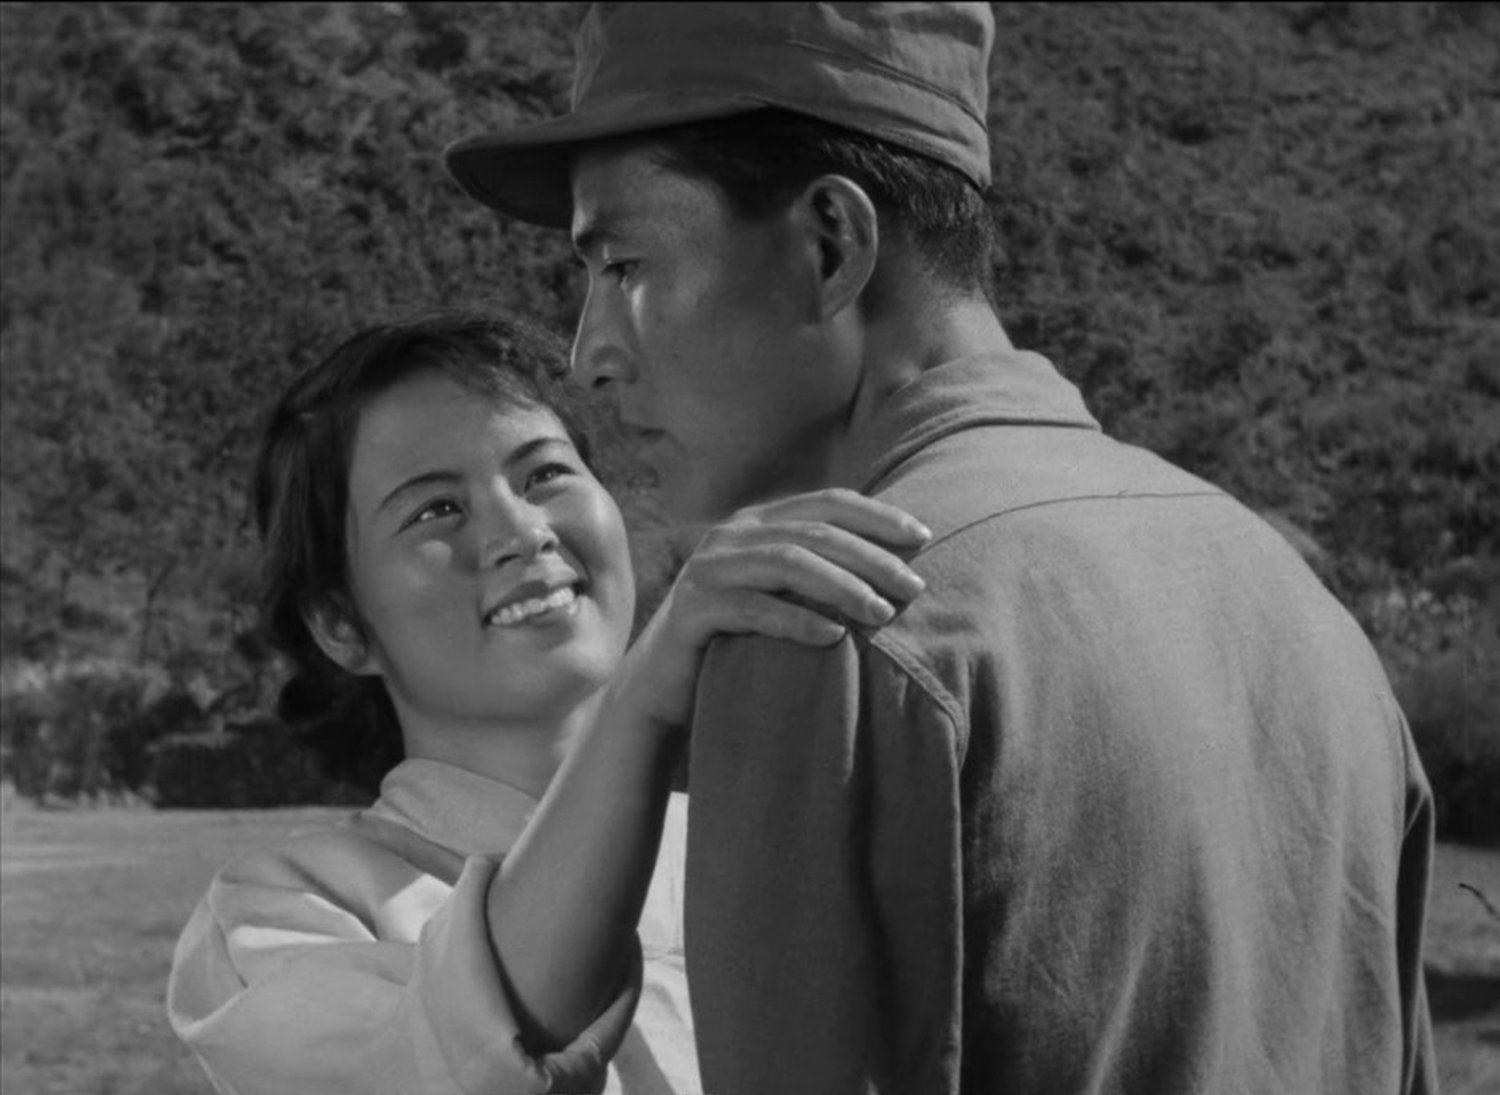 A still from Nakdong River (1952), one of the classic Korean films being shown at this year’s Udine Far East Film Festival as part of a programme to tell the Korean film industry’s “unexpected success story” during the tumultuous 1950s.